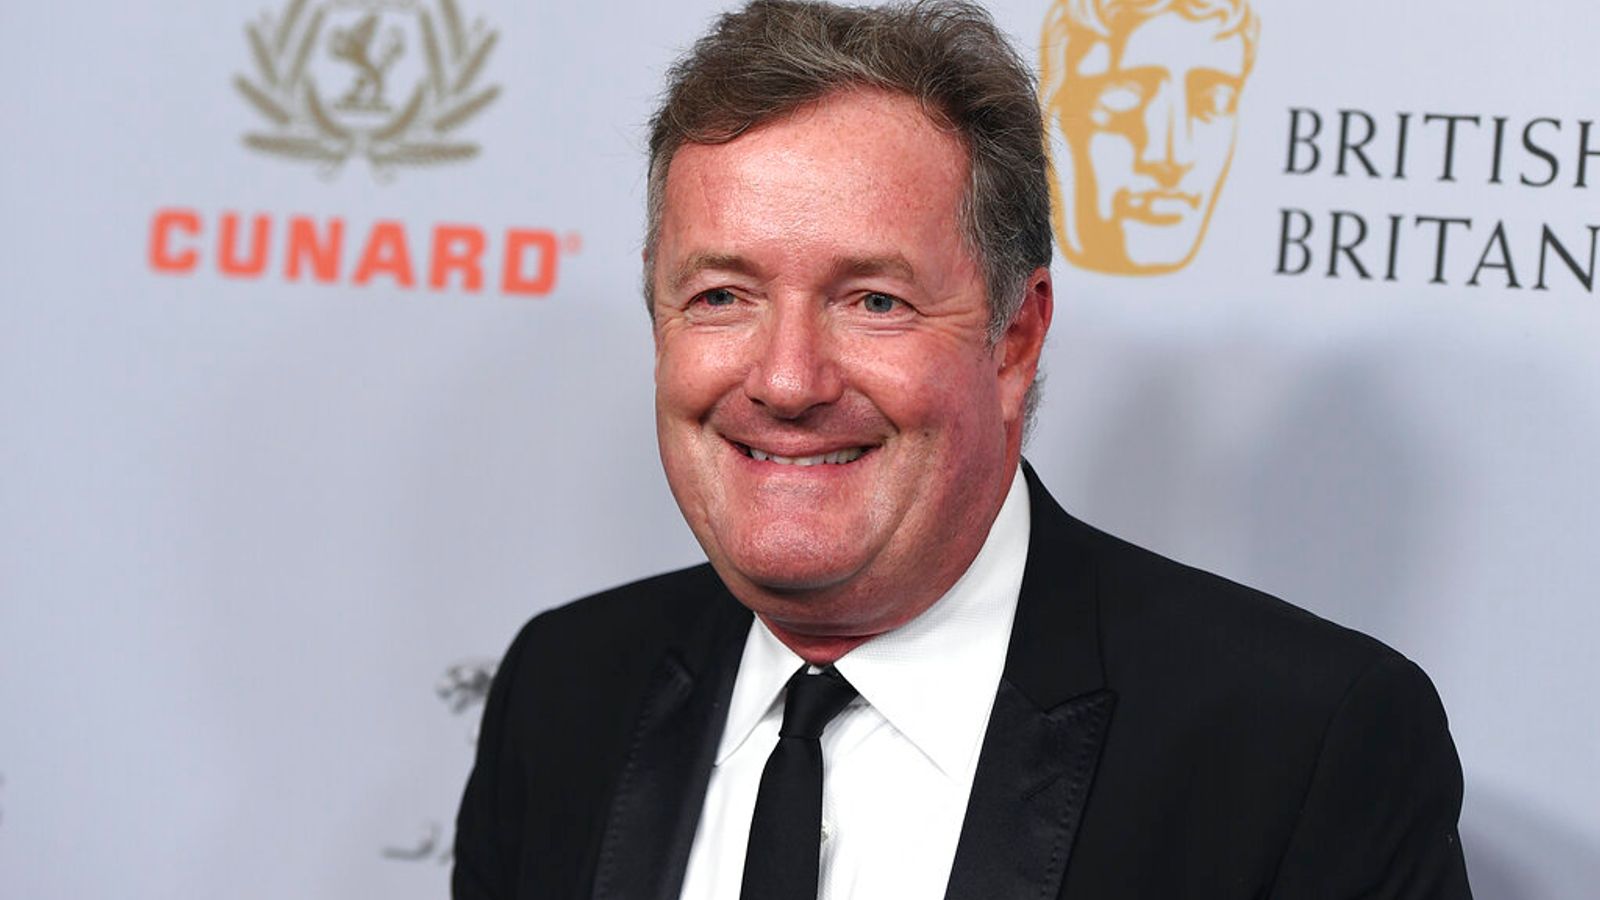 Piers Morgan's Twitter account shares string of offensive messages after apparent hack